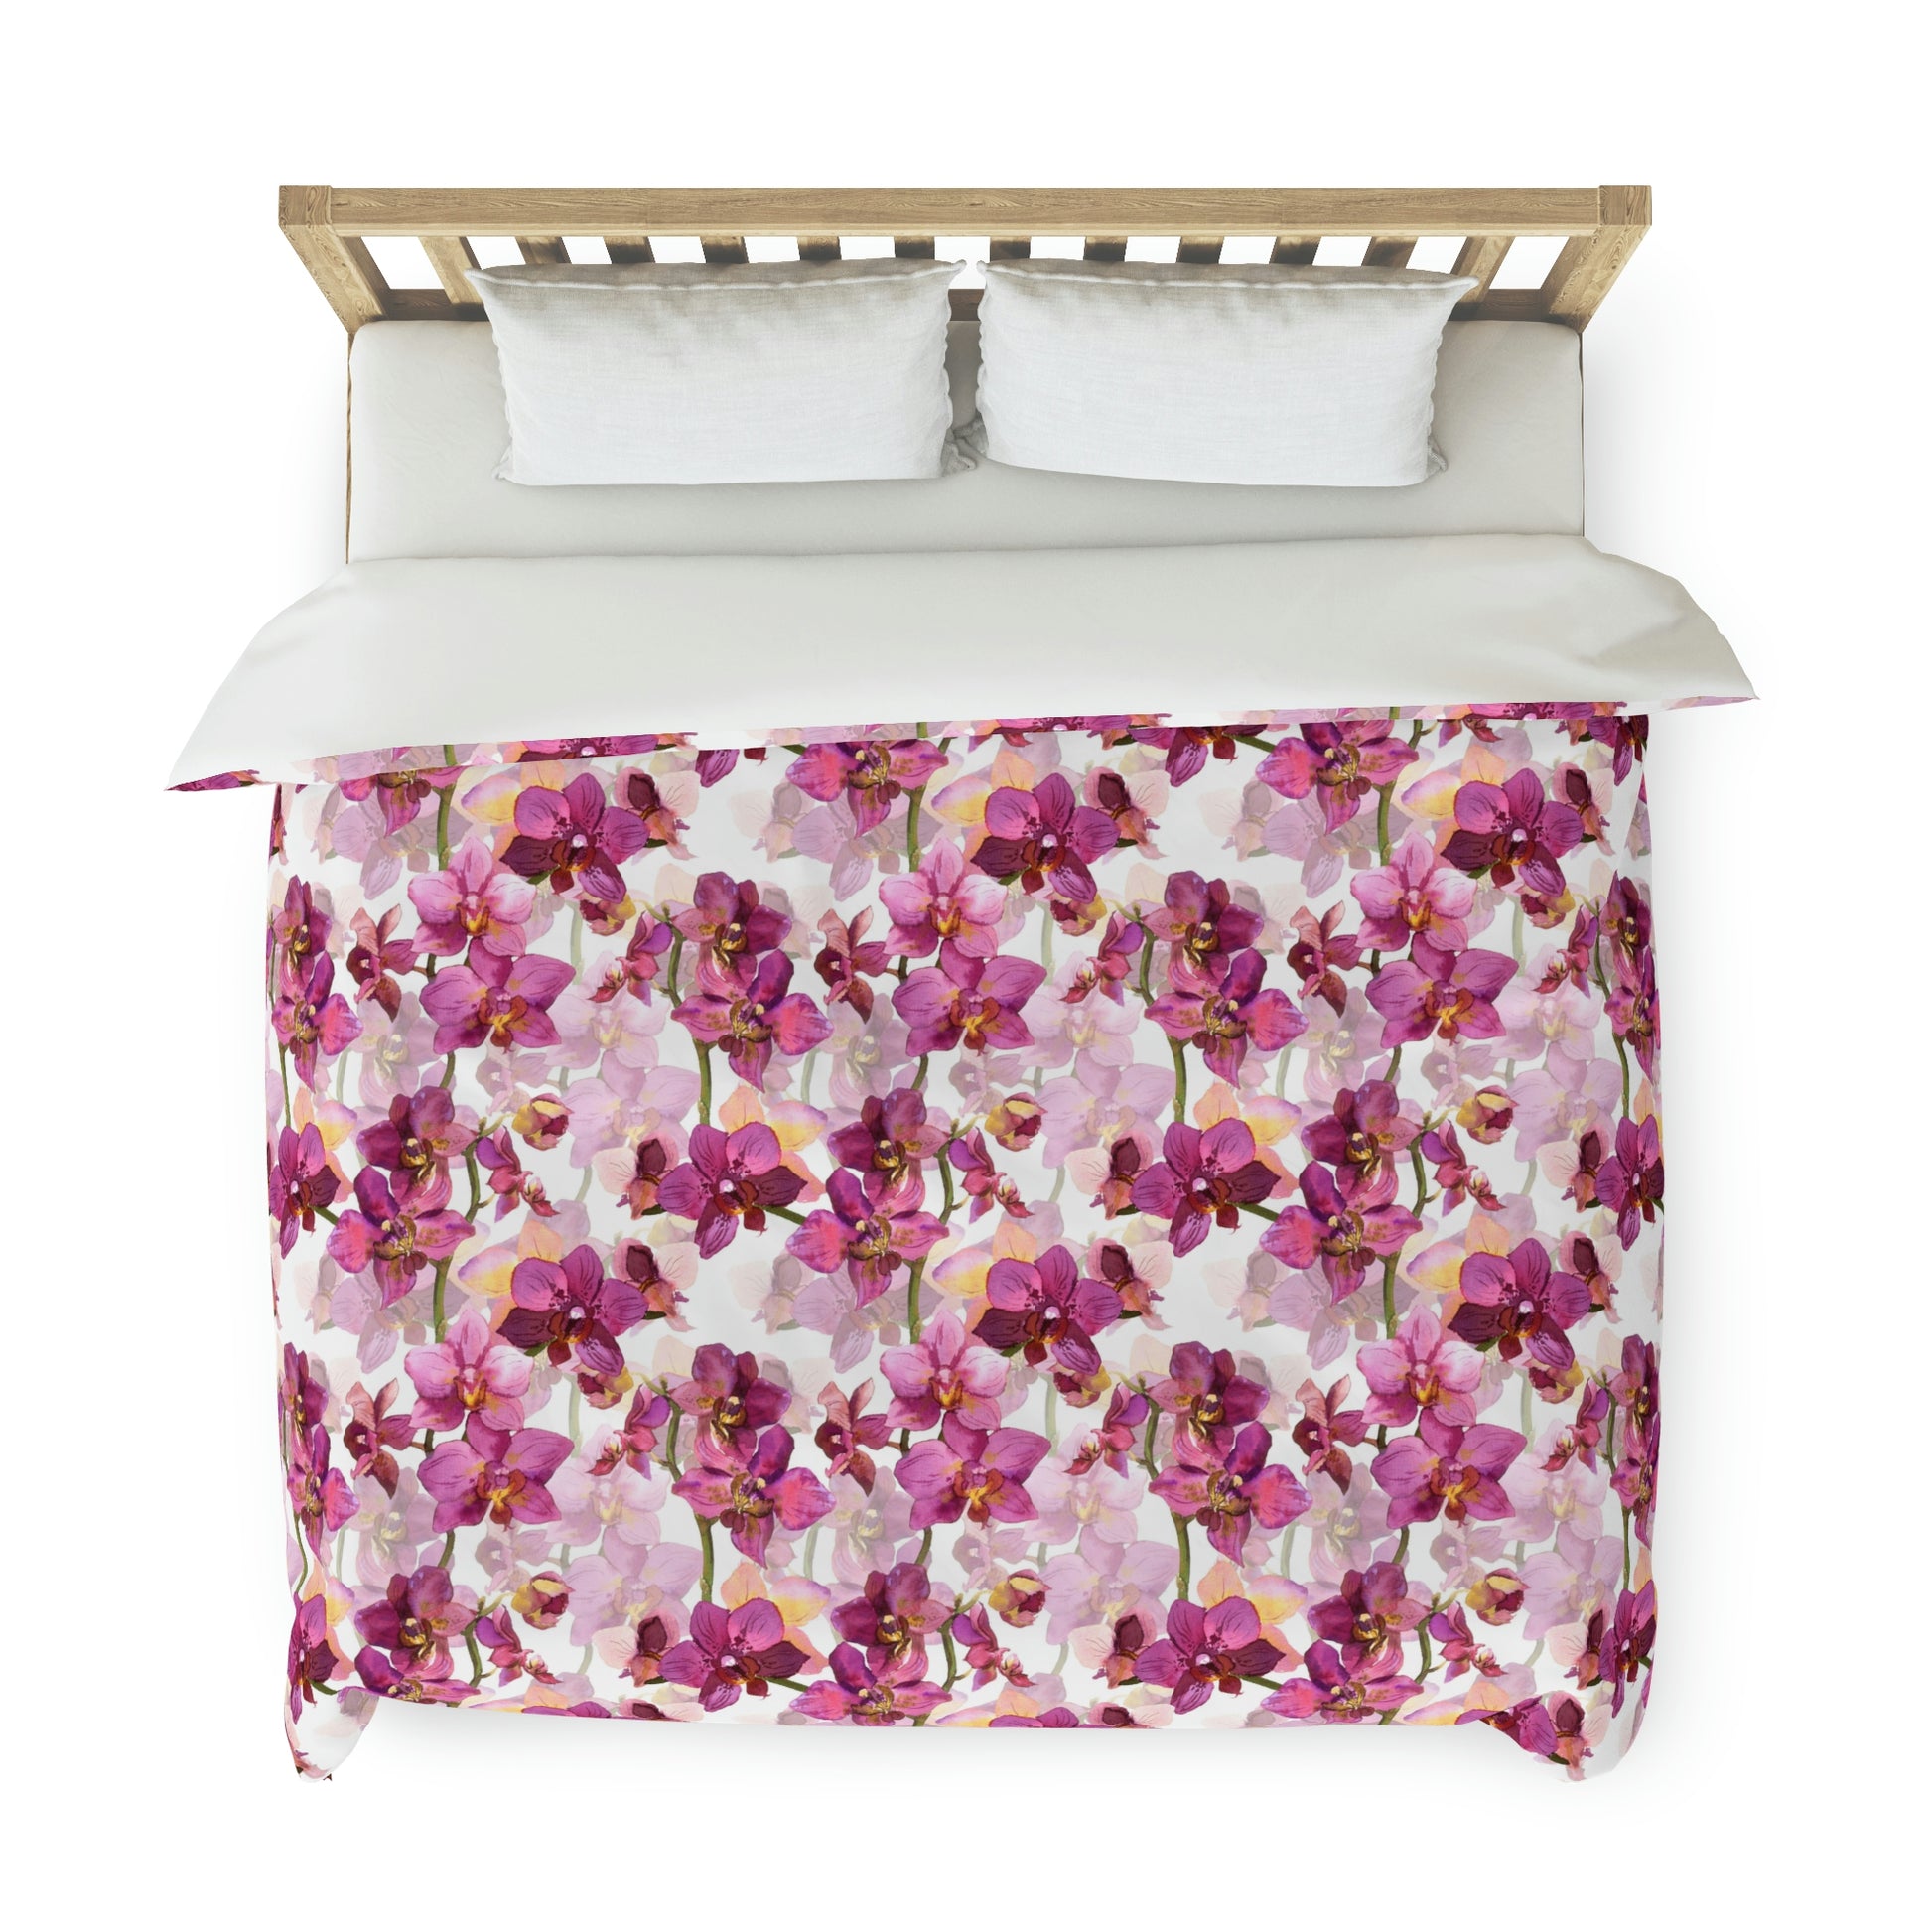 Bold Fuchsia pink purple Floral Pattern Duvet Cover lying on a bed, microfiber floral duvet cover bedroom accent